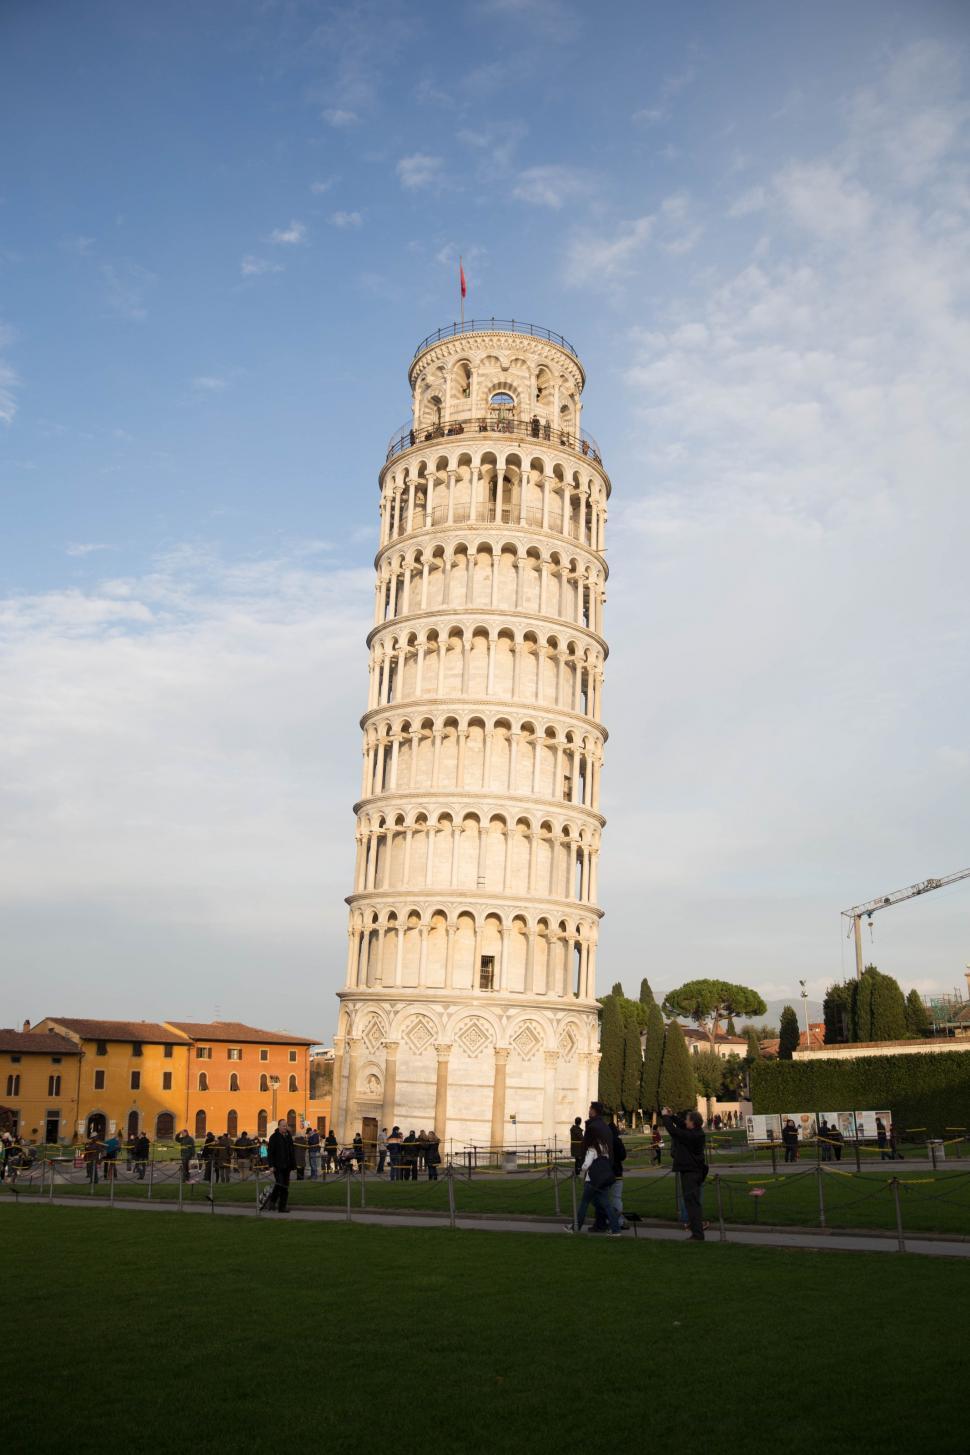 Free Image of Leaning tower of Pisa, Italy 